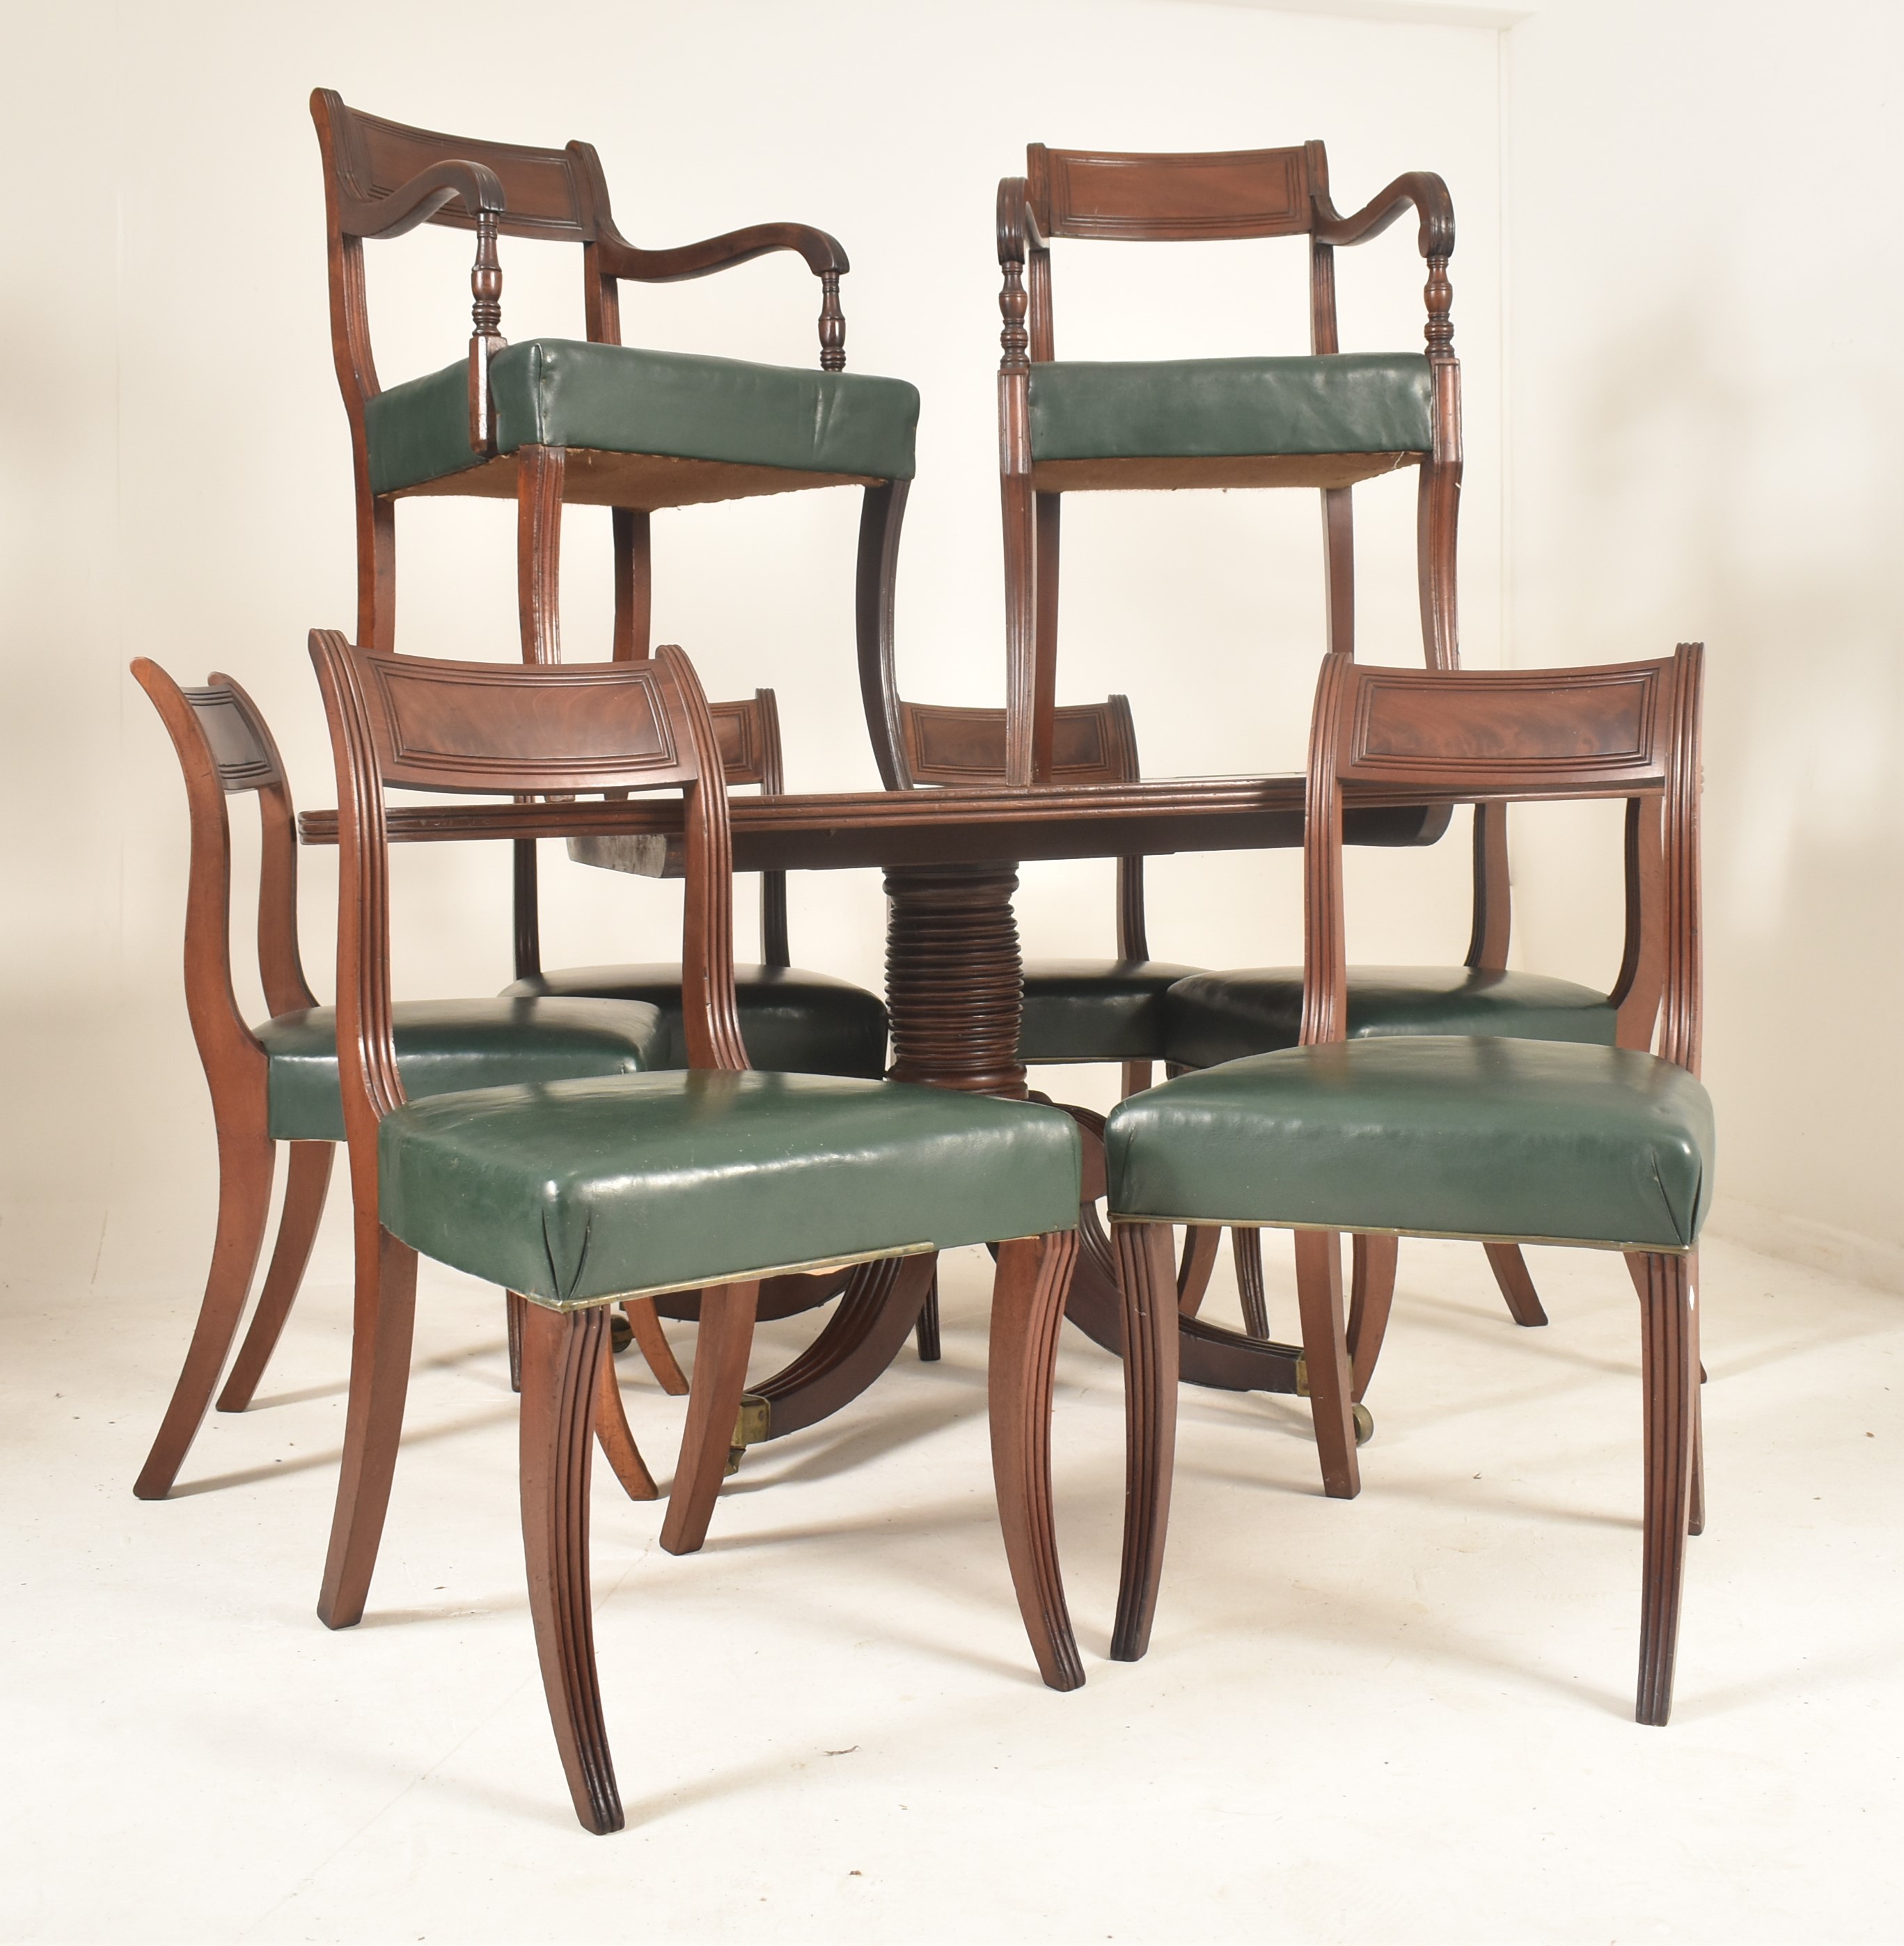 REGENCY 19TH CENTURY MAHOGANY TILT TOP DINING TABLE WITH CHAIRS